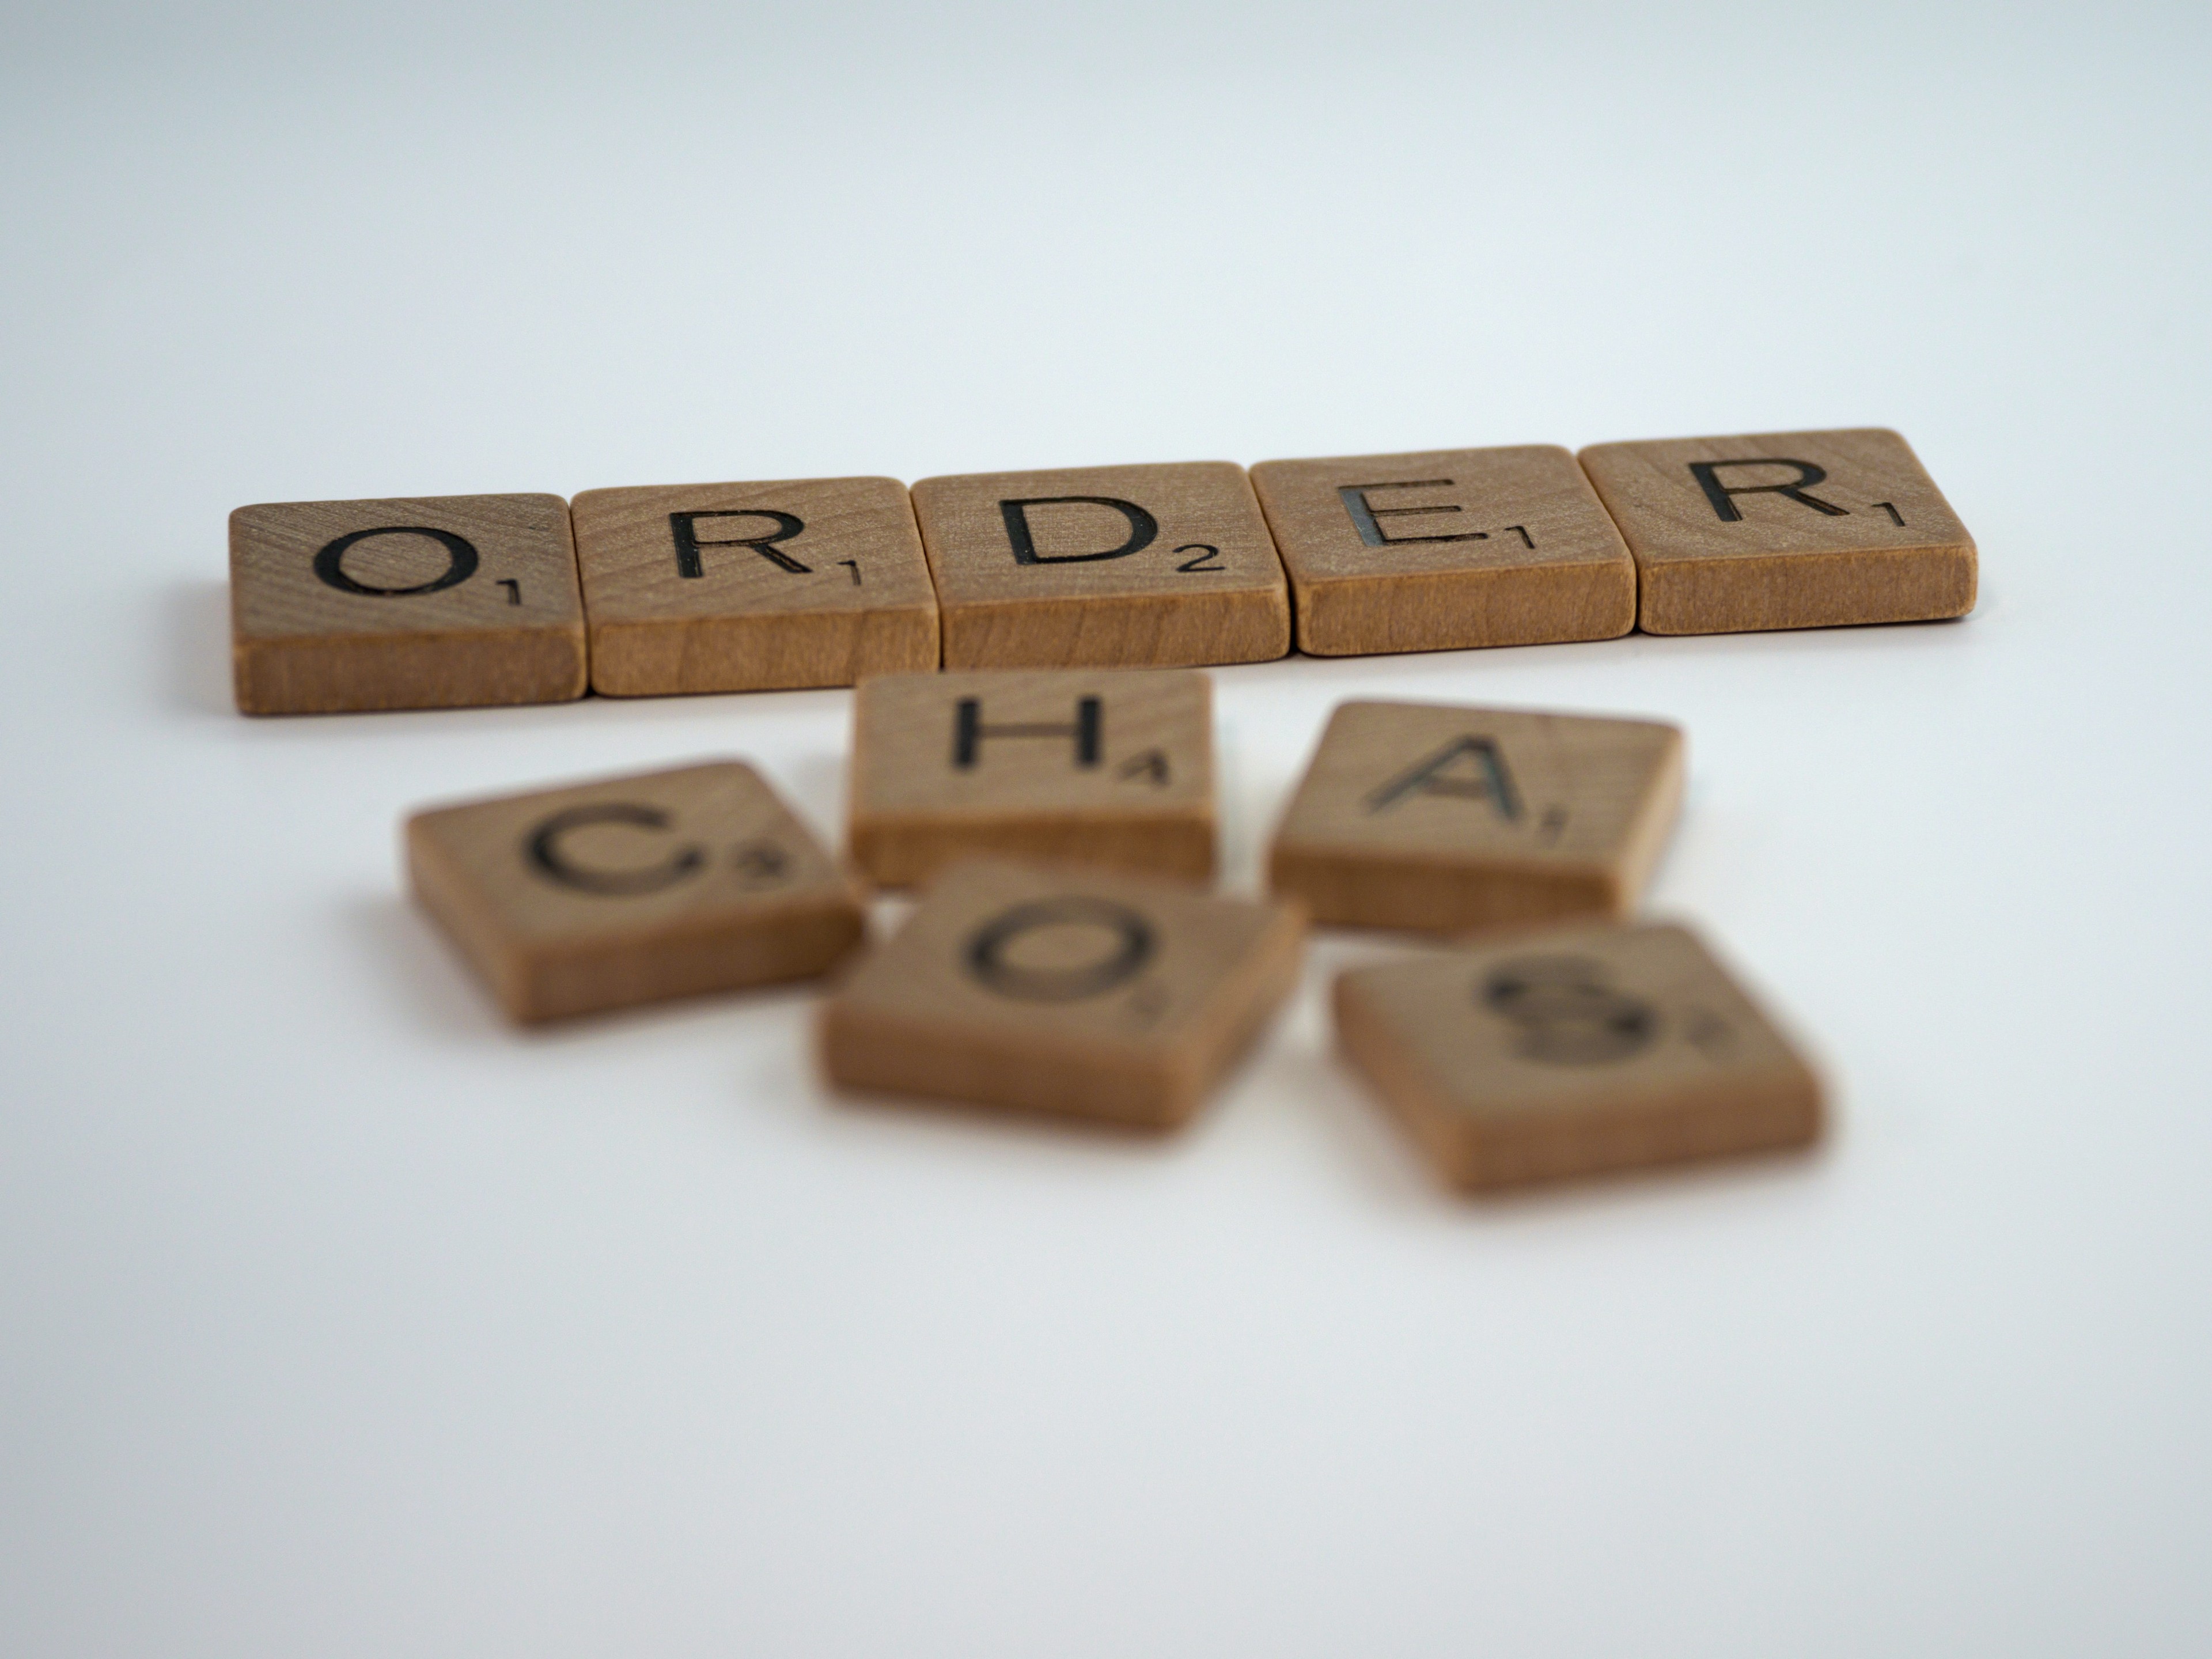 order and chaos scrabble pieces